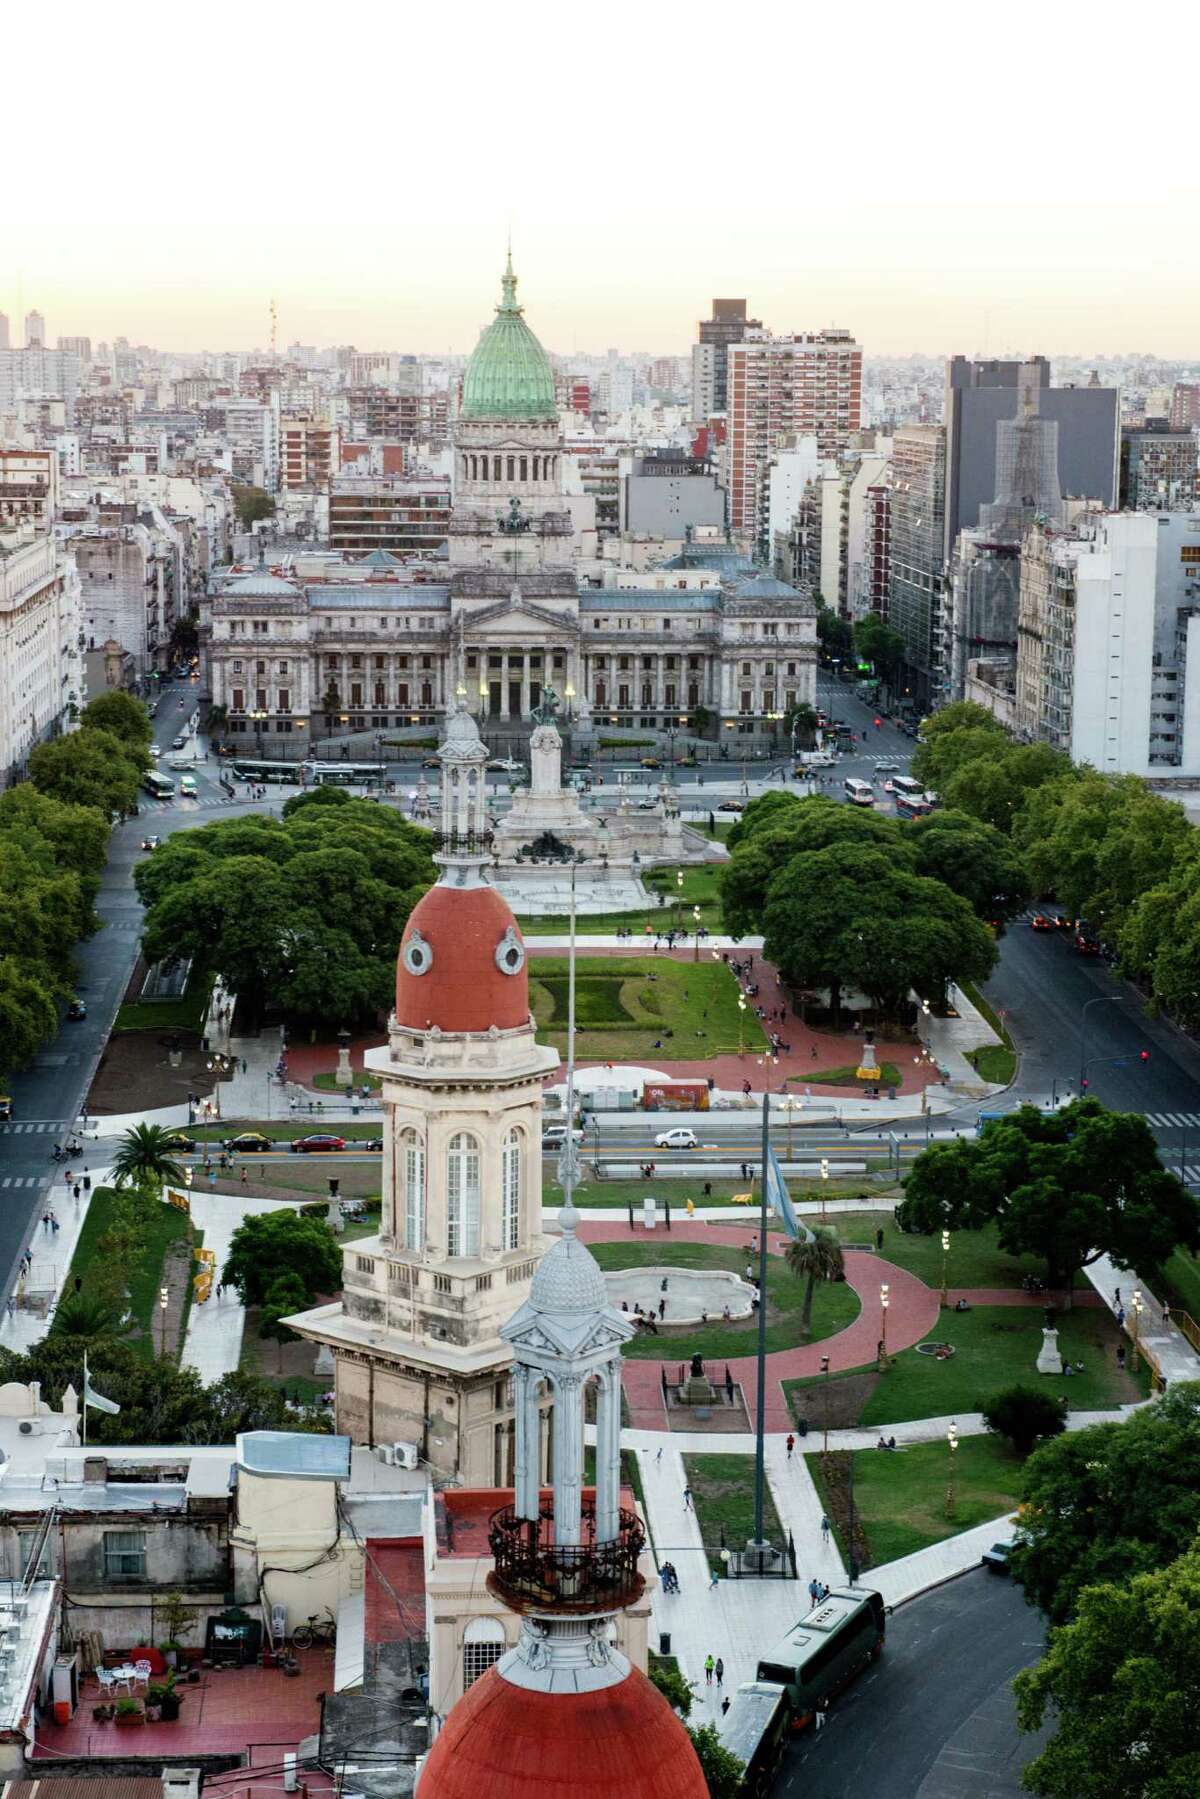 The view of Plaza del Congresso and the Argentine parliament building from Palacio Barolo, one of the city's most beautiful buildings.